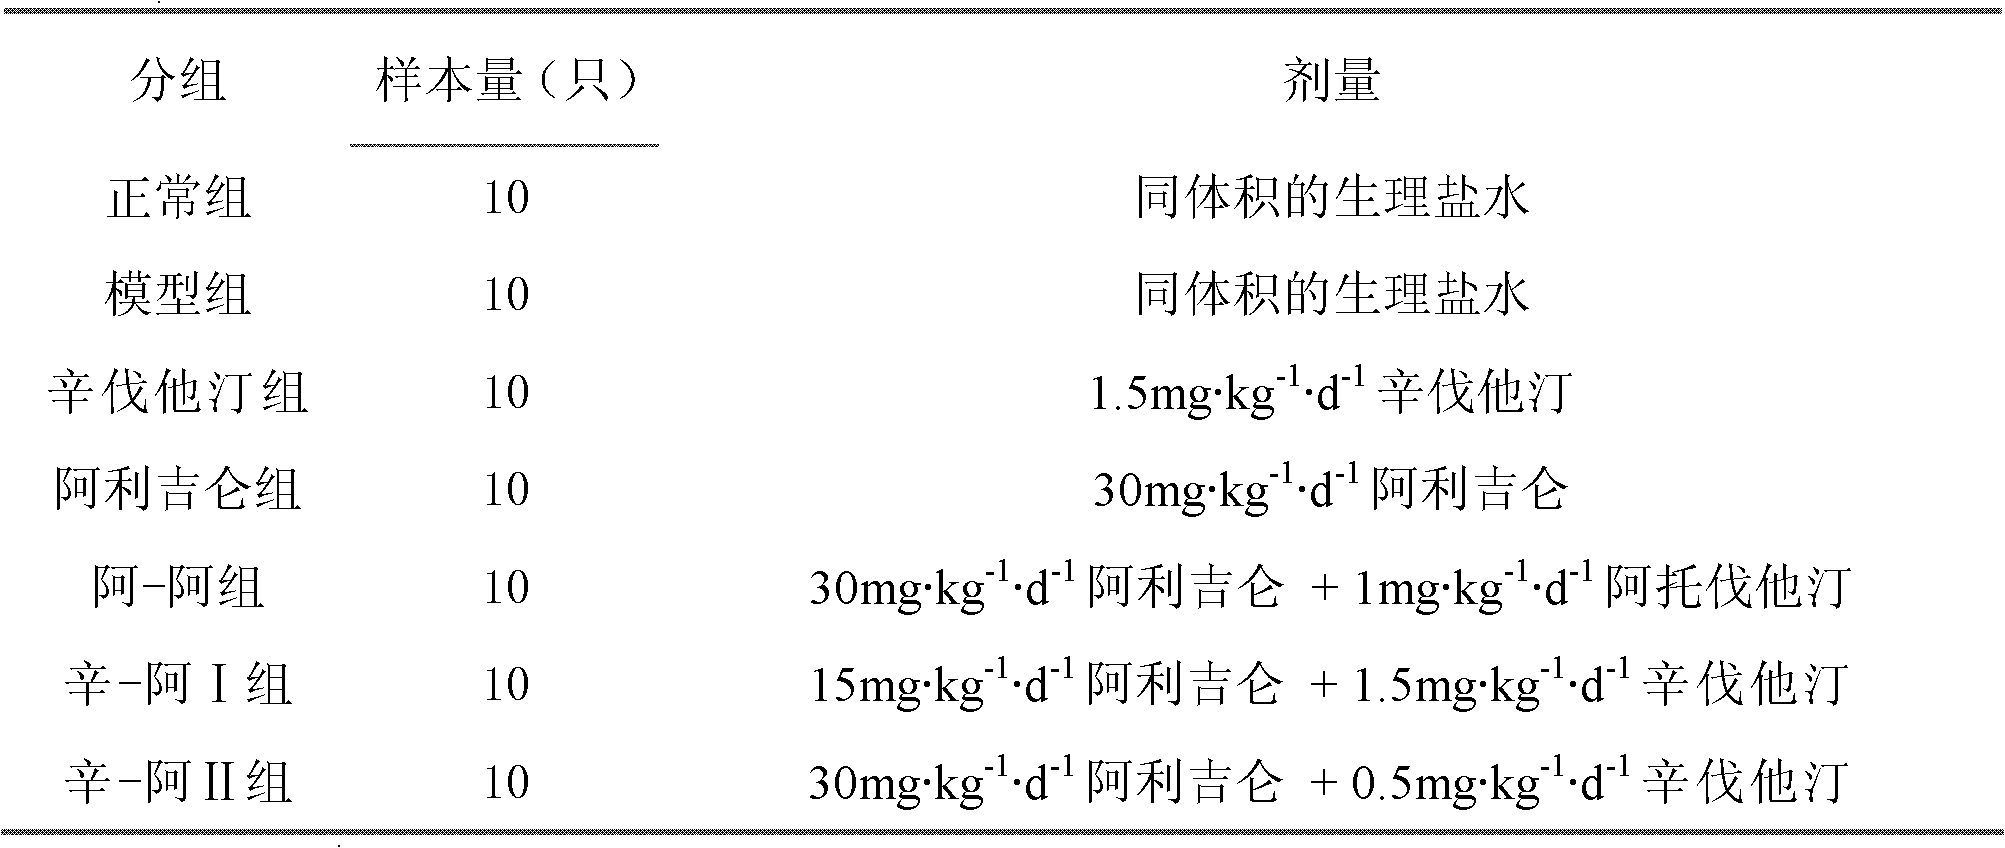 A kind of western medicine compound and application for treating coronary heart disease